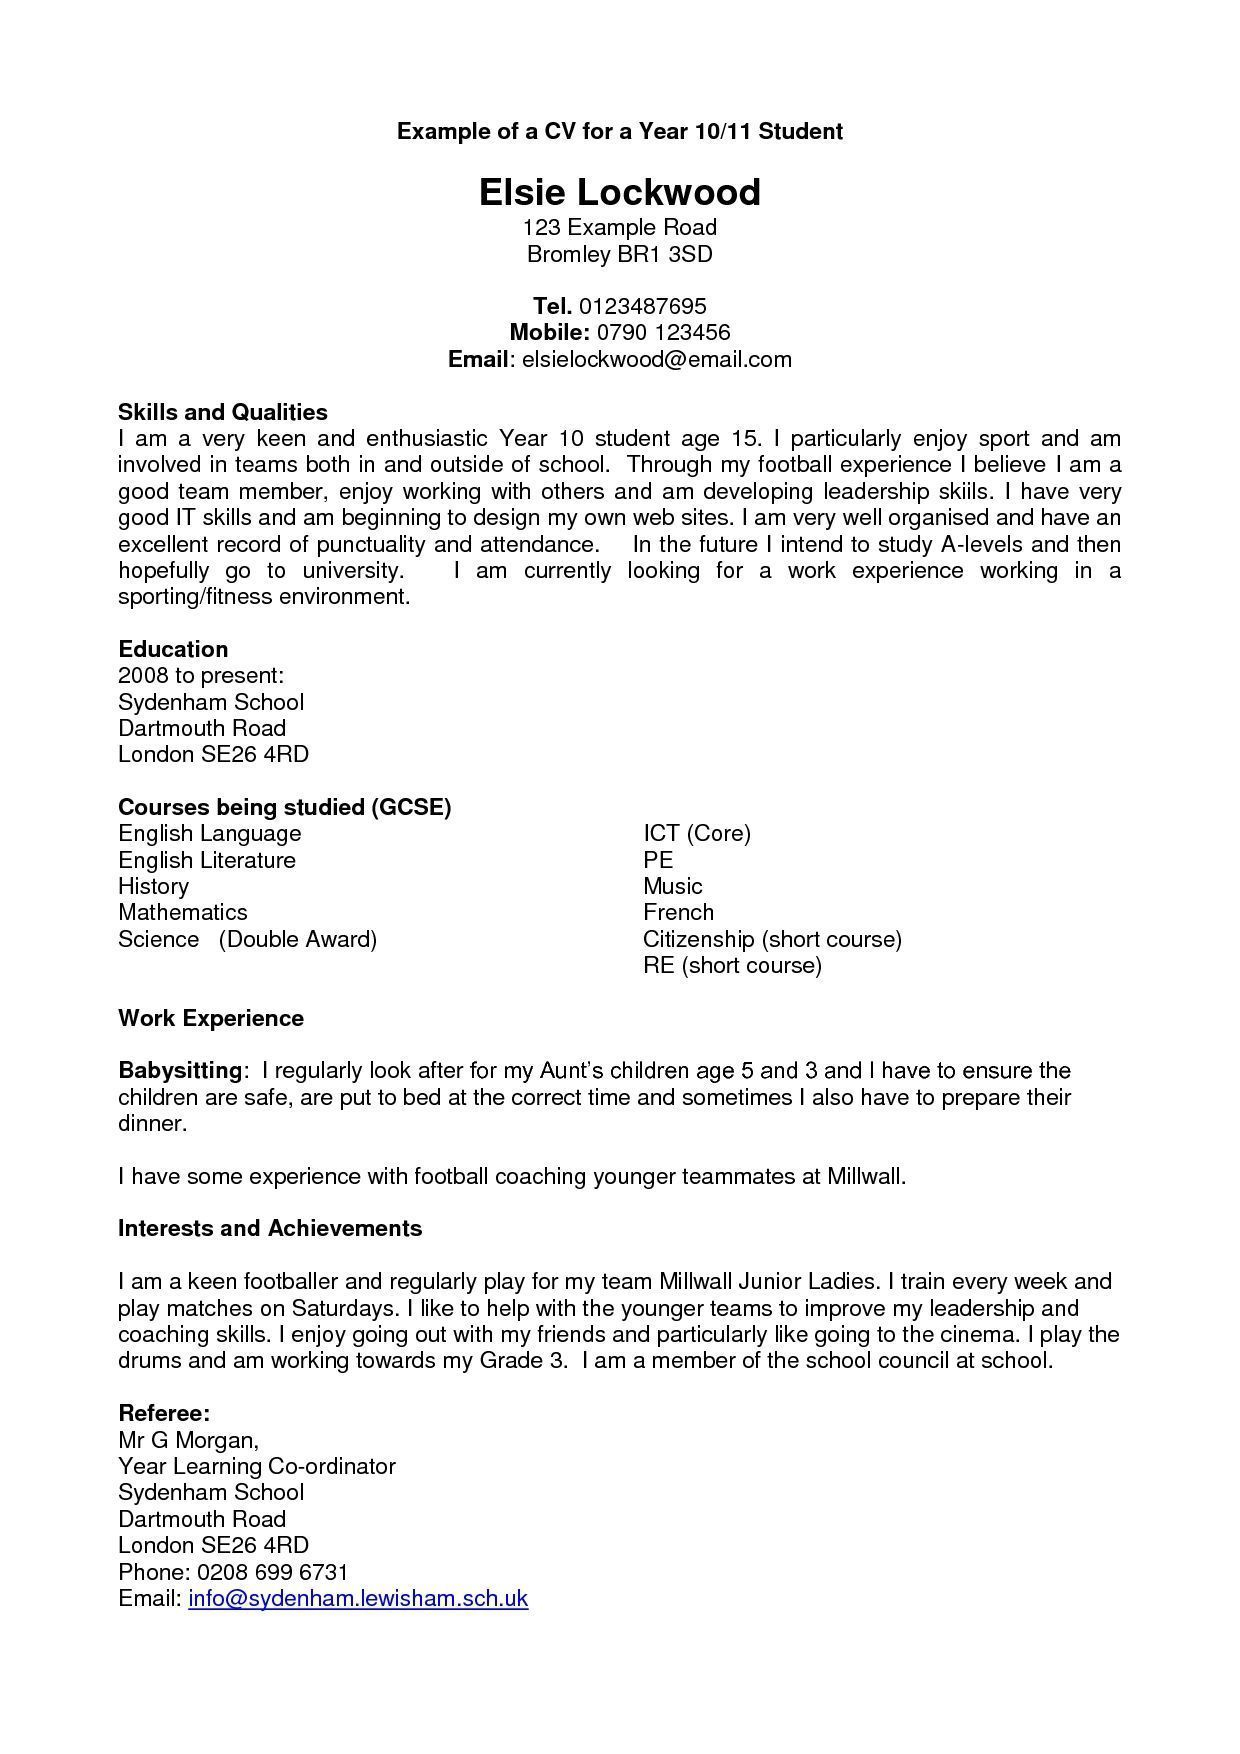 Cv Template For Year 10 Work Experience Debandje within proportions 1240 X 1754